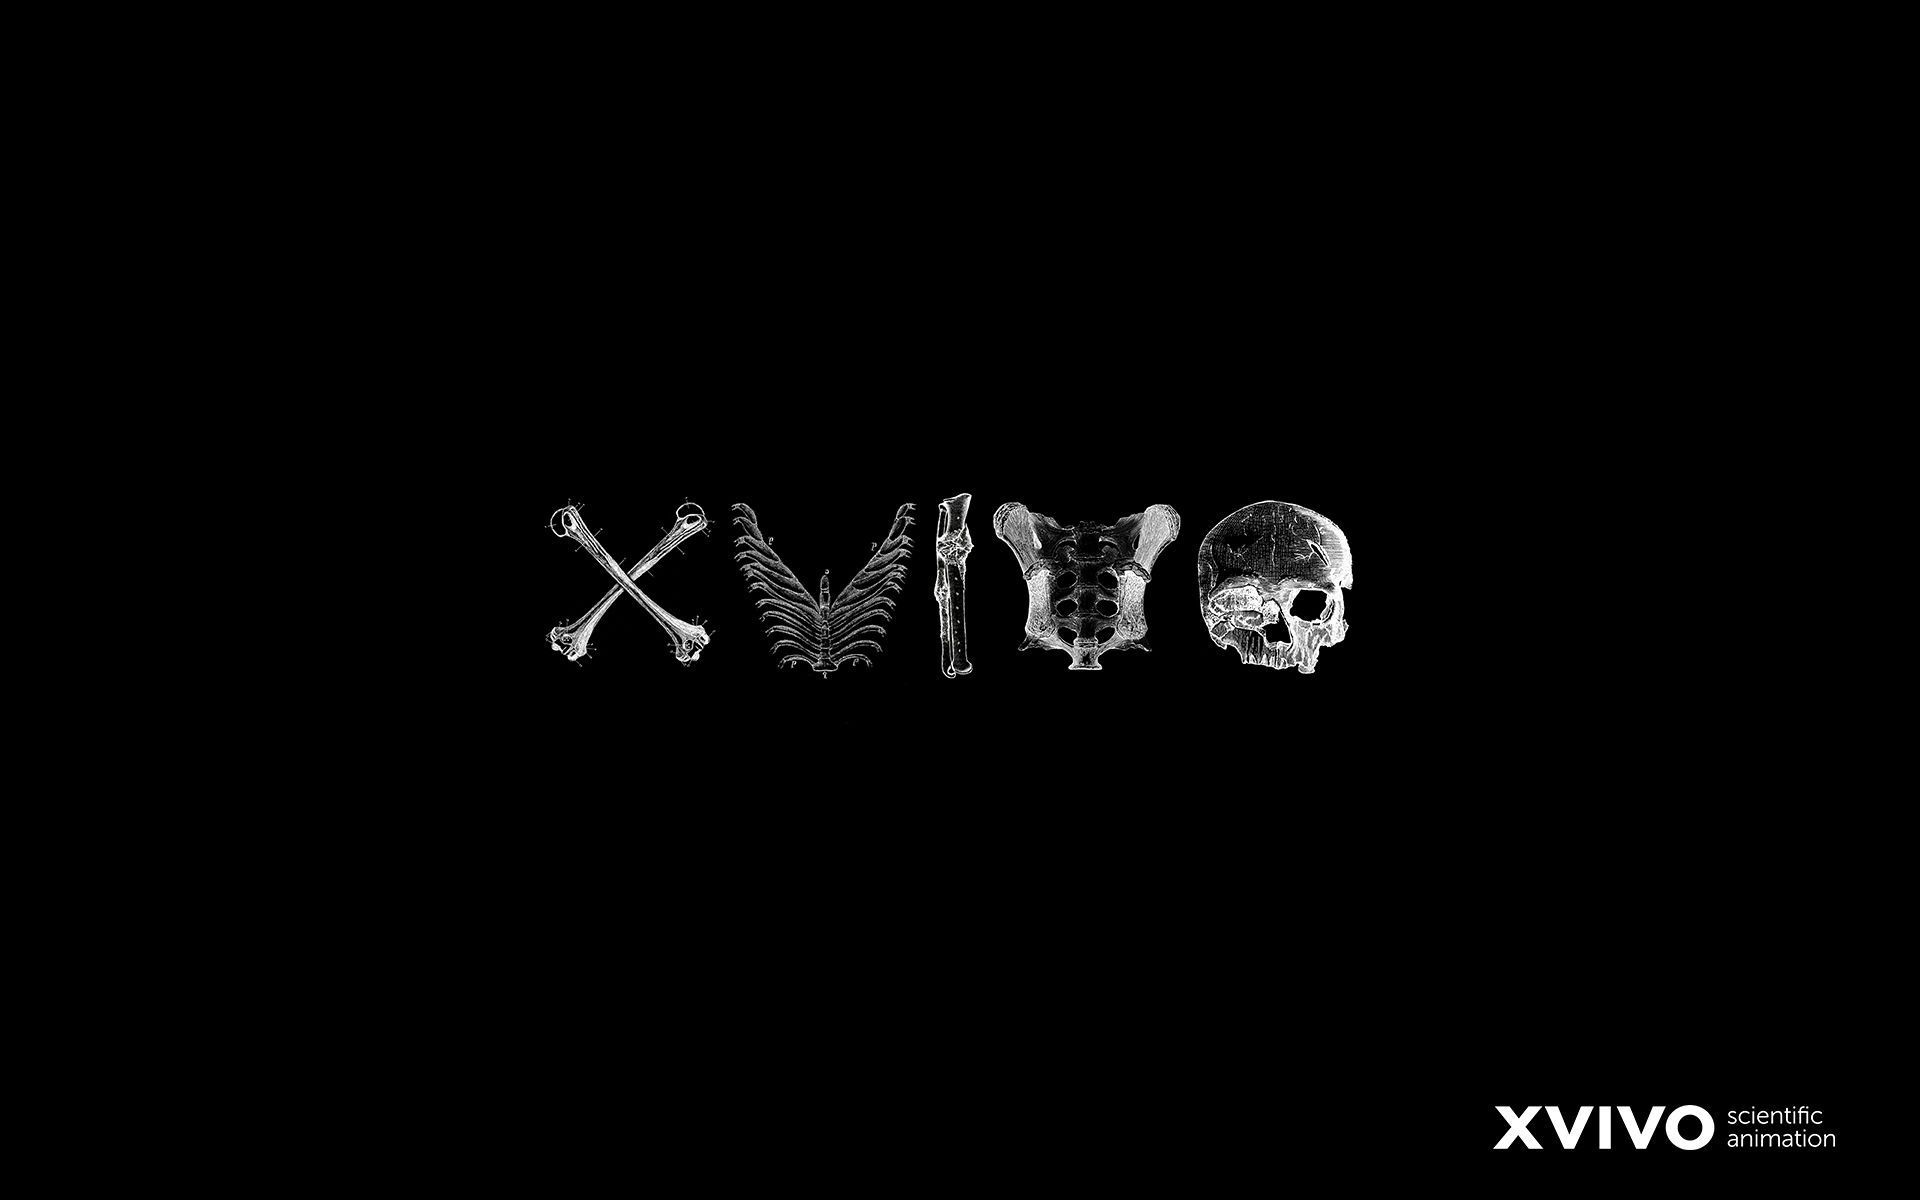 XVIVO logo, with a black background and the letters made up of different body parts - 